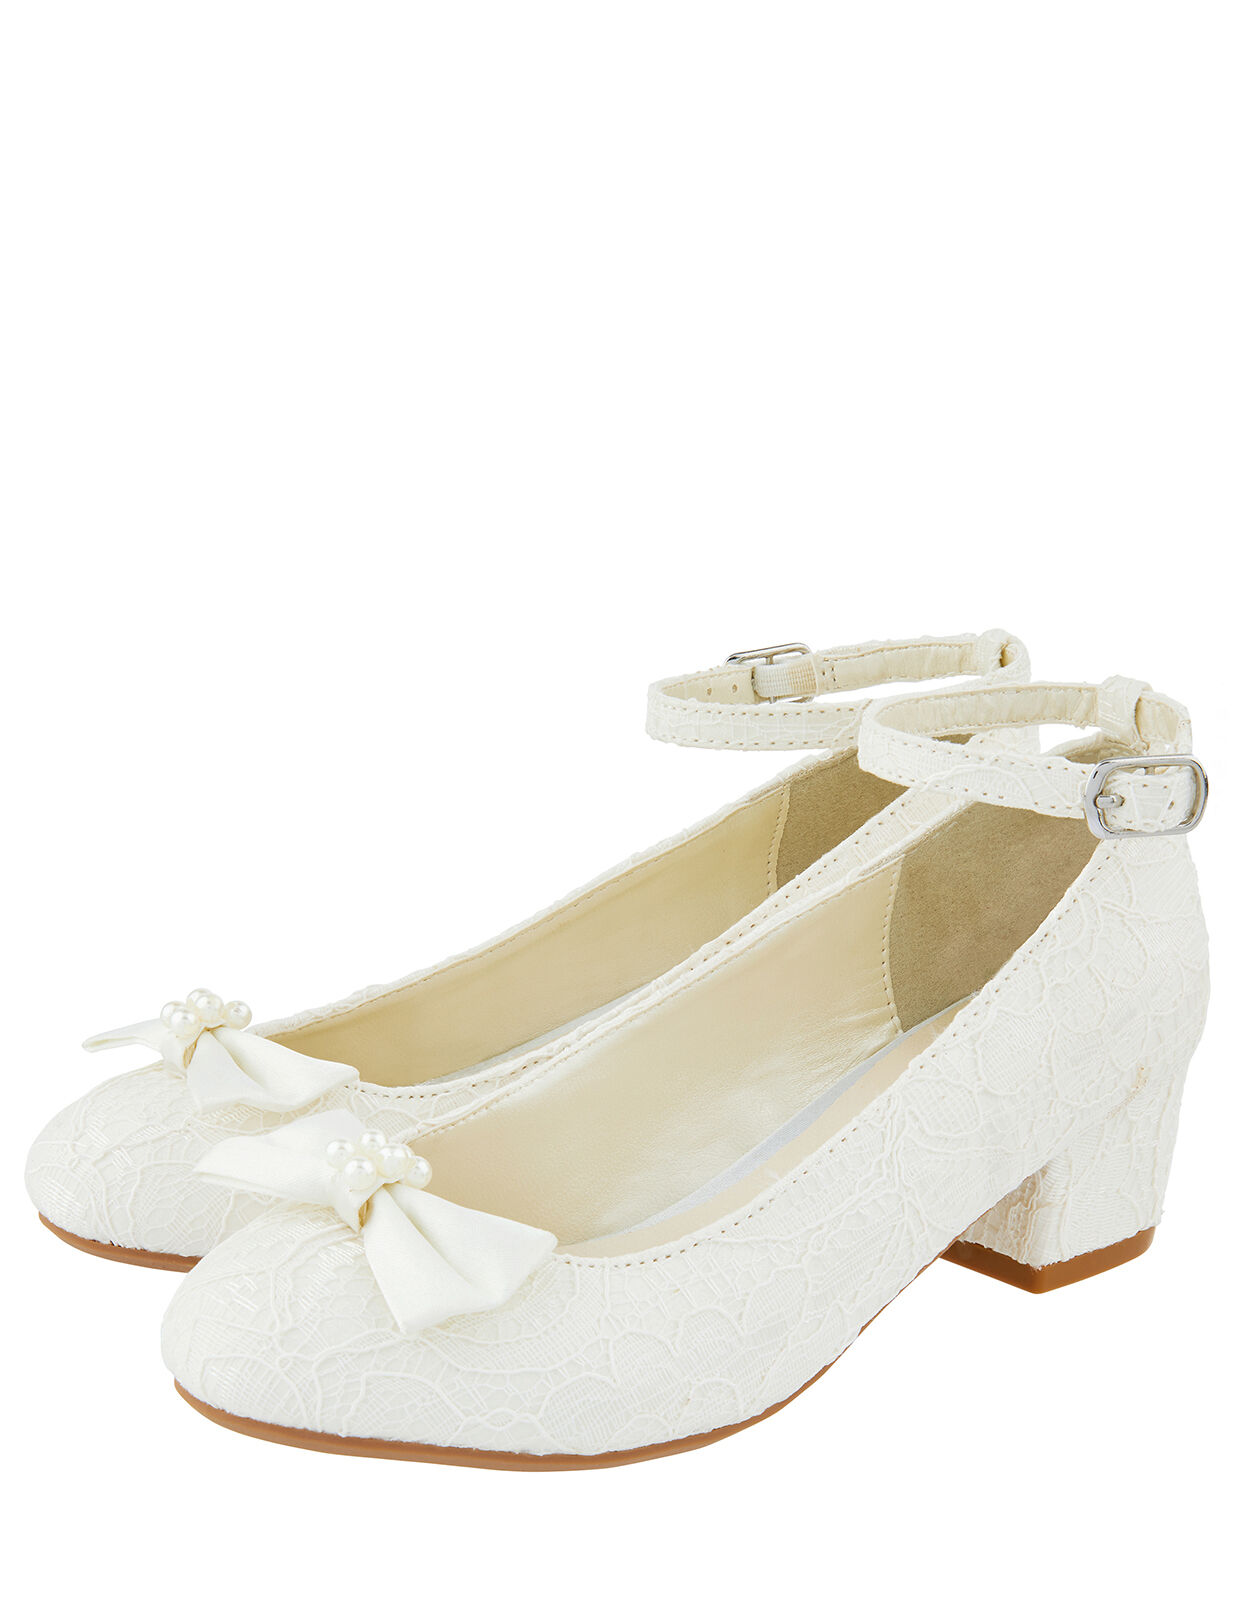 baby christening shoes monsoon